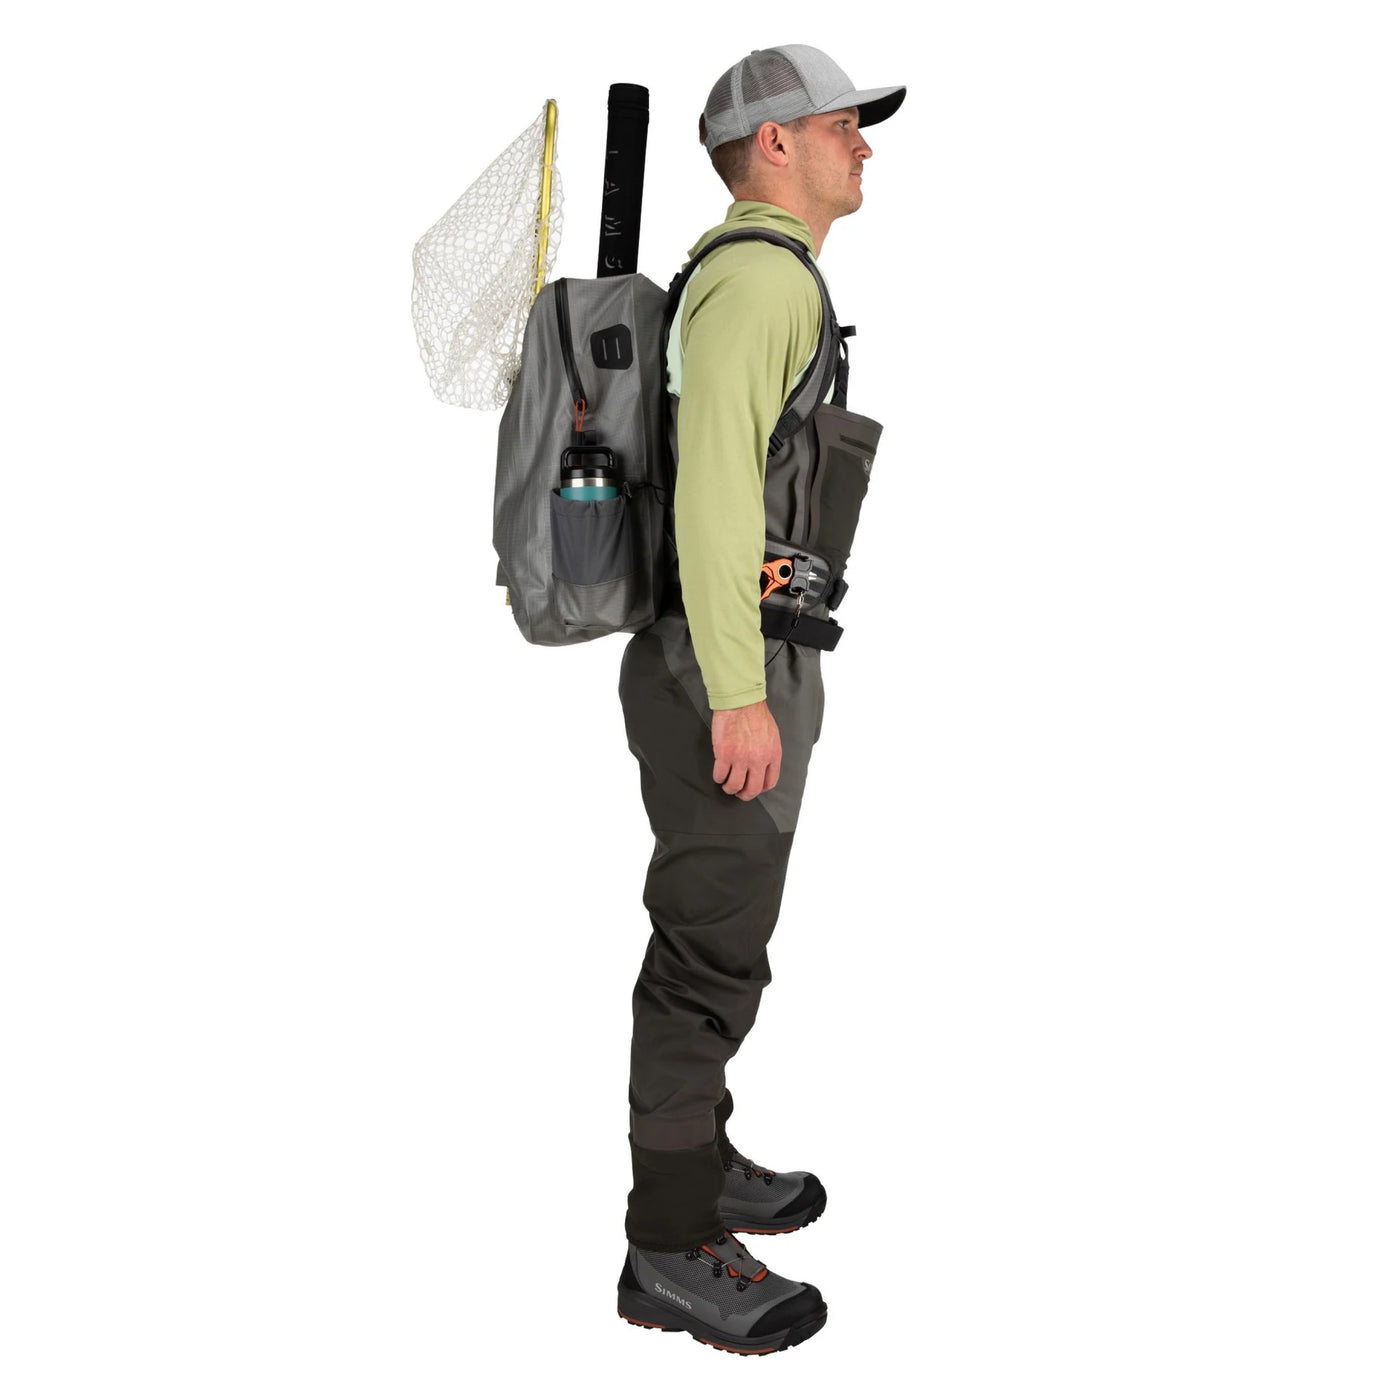 Shop Fly Fishing Backpacks: Simms, YETI, and More